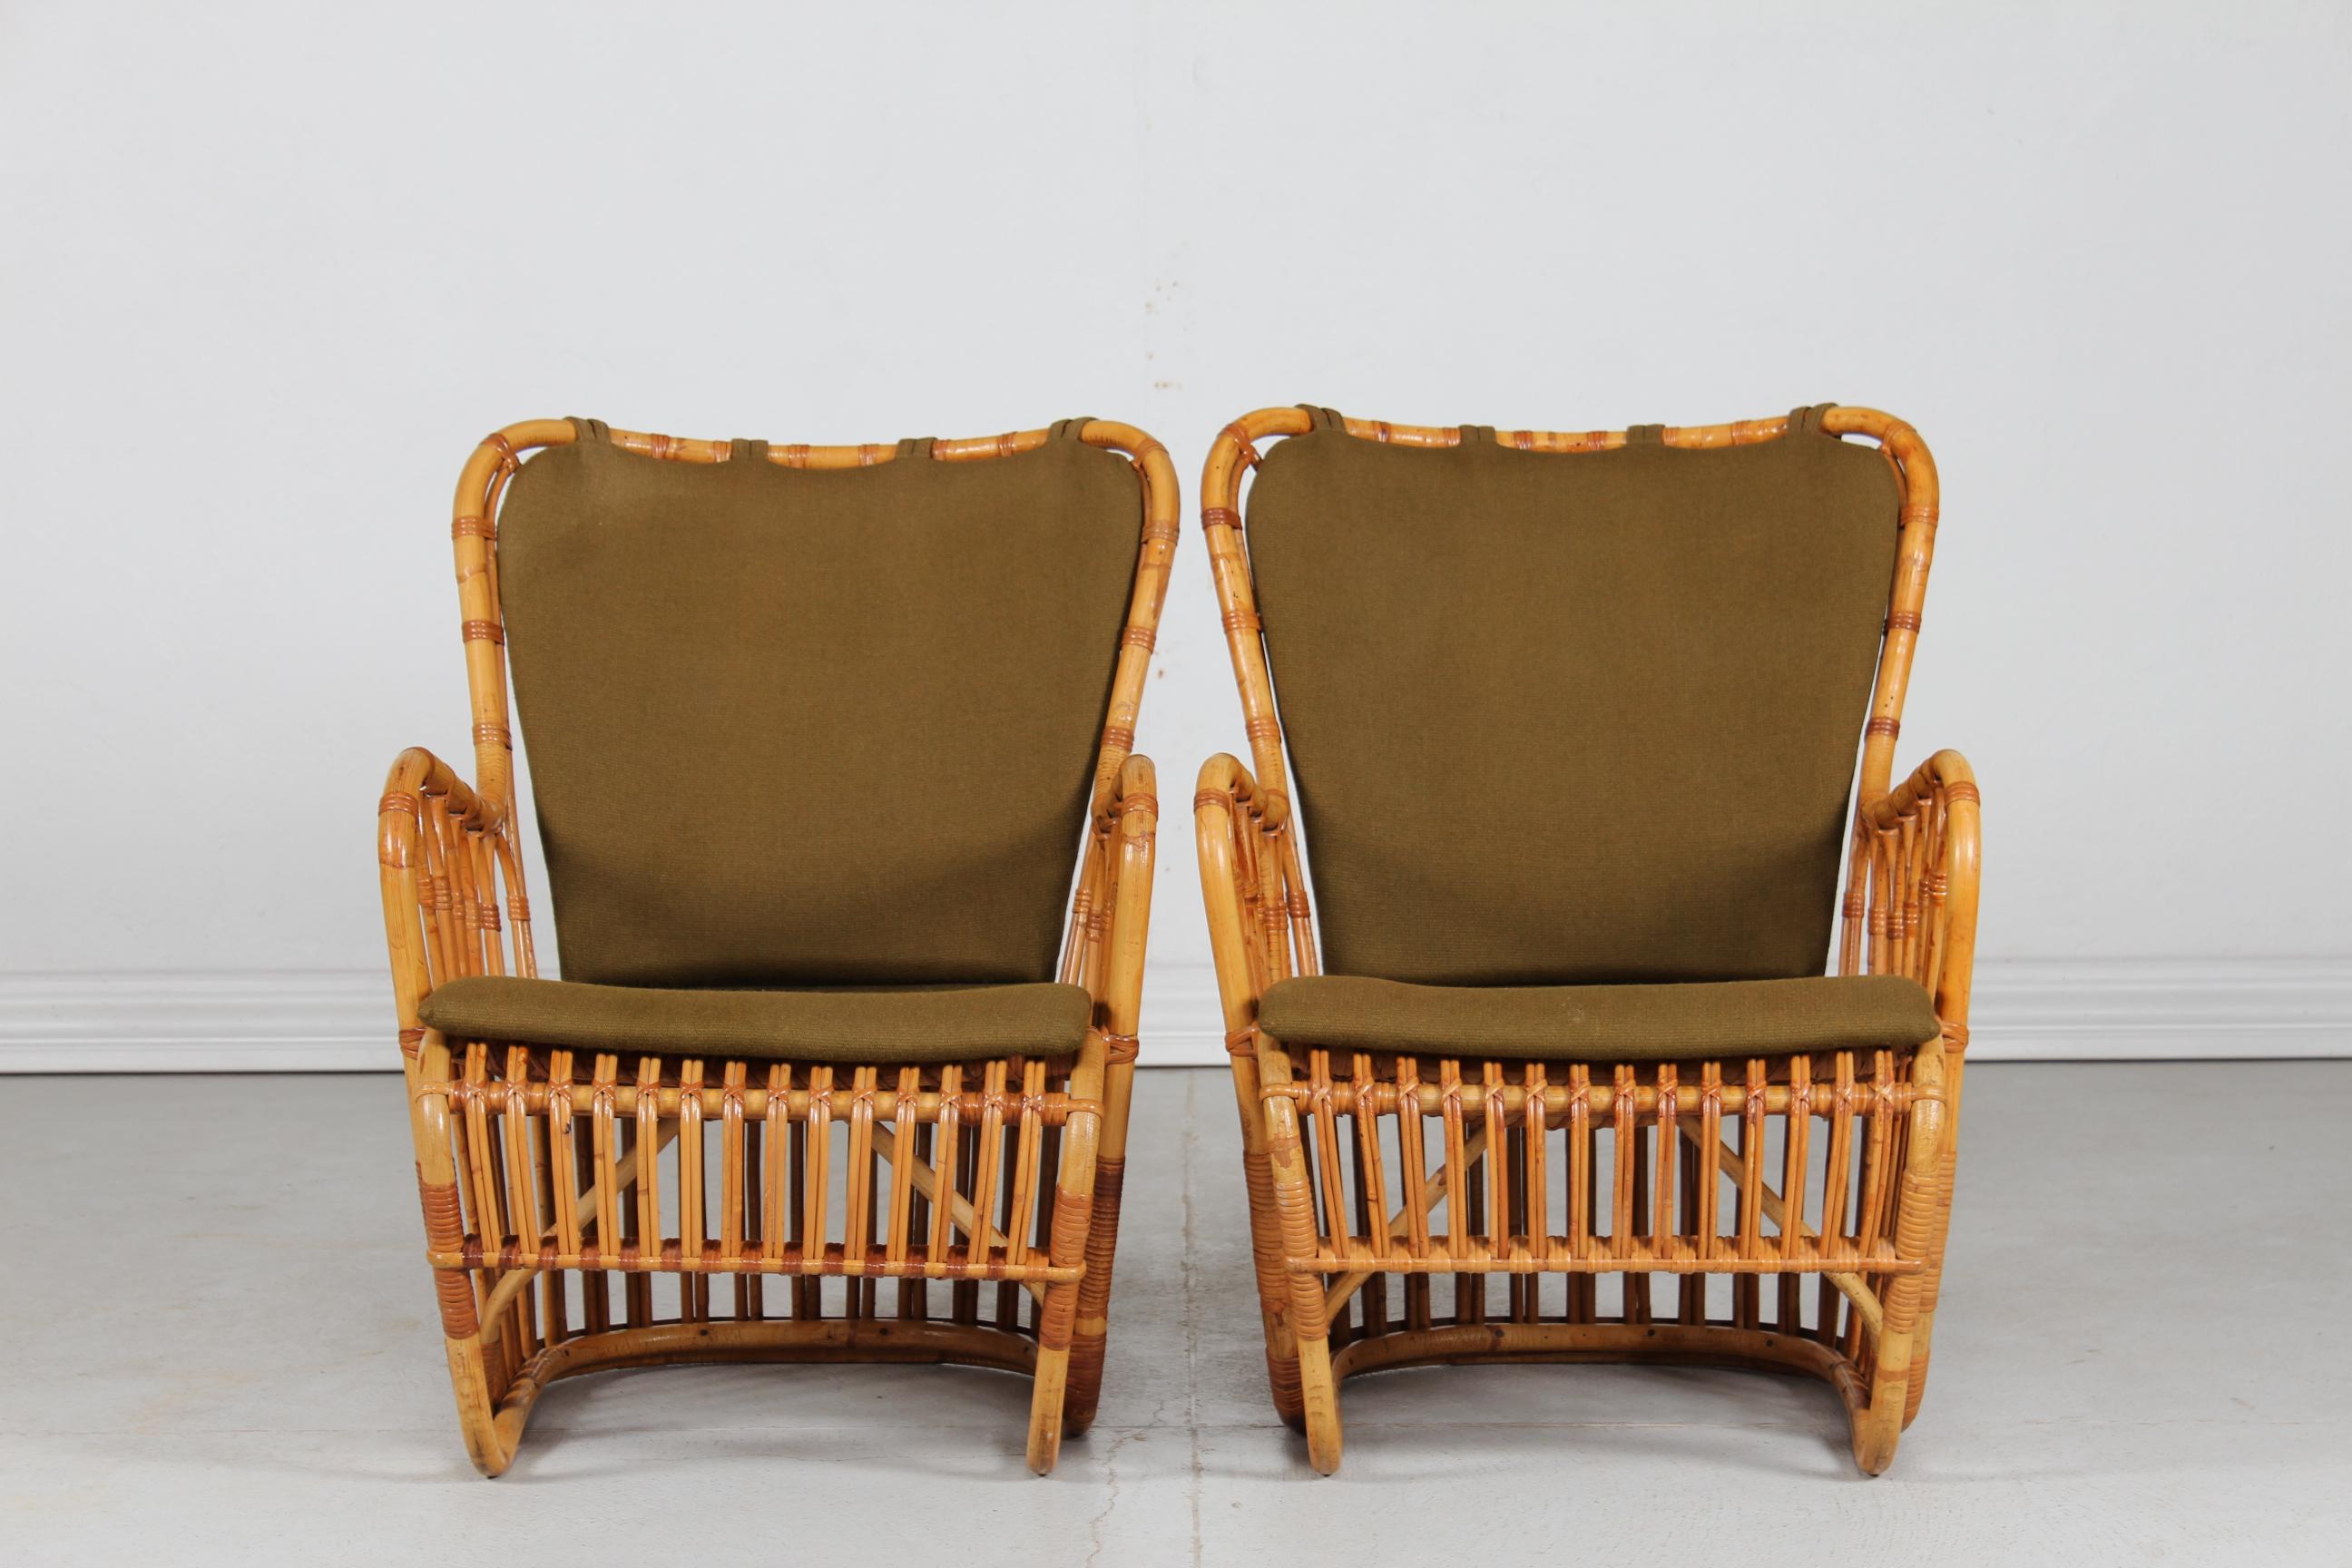 Tove Kindt-Larsen (1906-94) pair of vintage bamboo easy chairs model Tulip launched in 1937.
These Chairs made by R. Wengler in Copenhagen, Denmark in the 1950s
Cushions with green upholstery.

Measures: Height 78 cm
Seat height 35 cm
Width 62